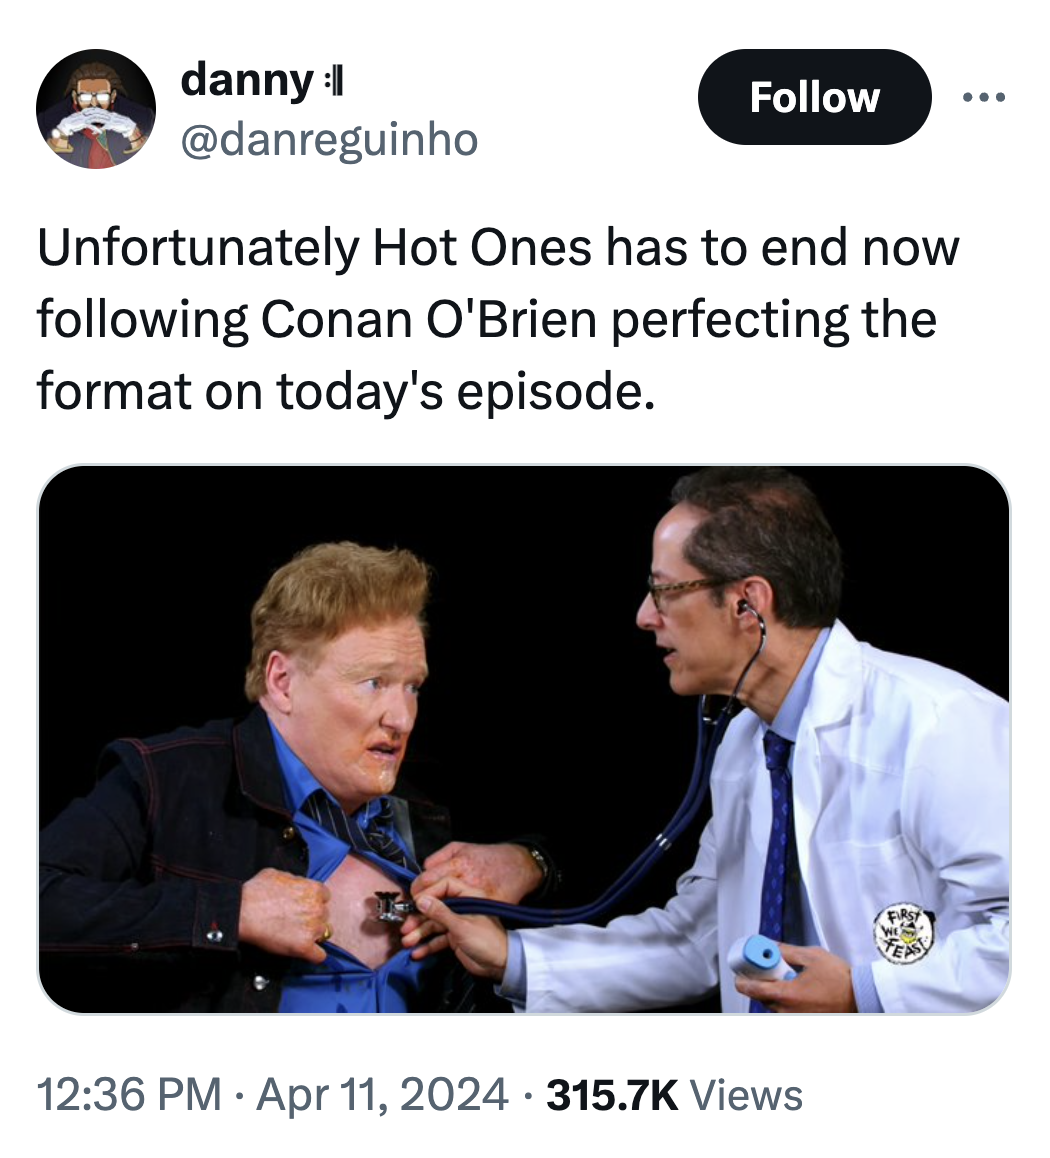 photo caption - dannyll Unfortunately Hot Ones has to end now ing Conan O'Brien perfecting the format on today's episode. Views